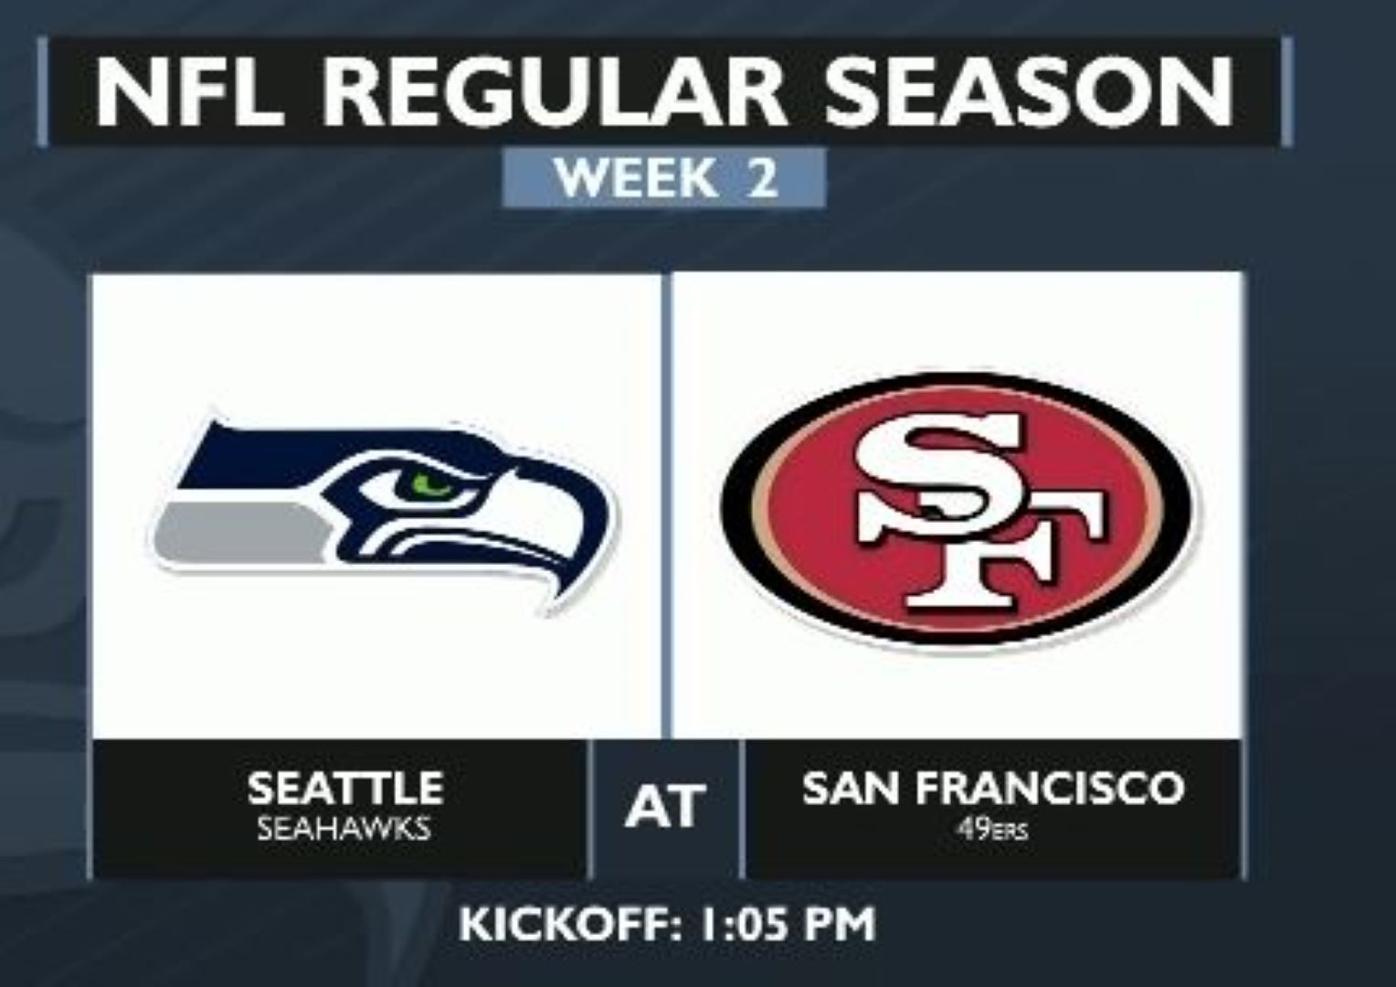 Seahawks look to continue winning ways against 49ers